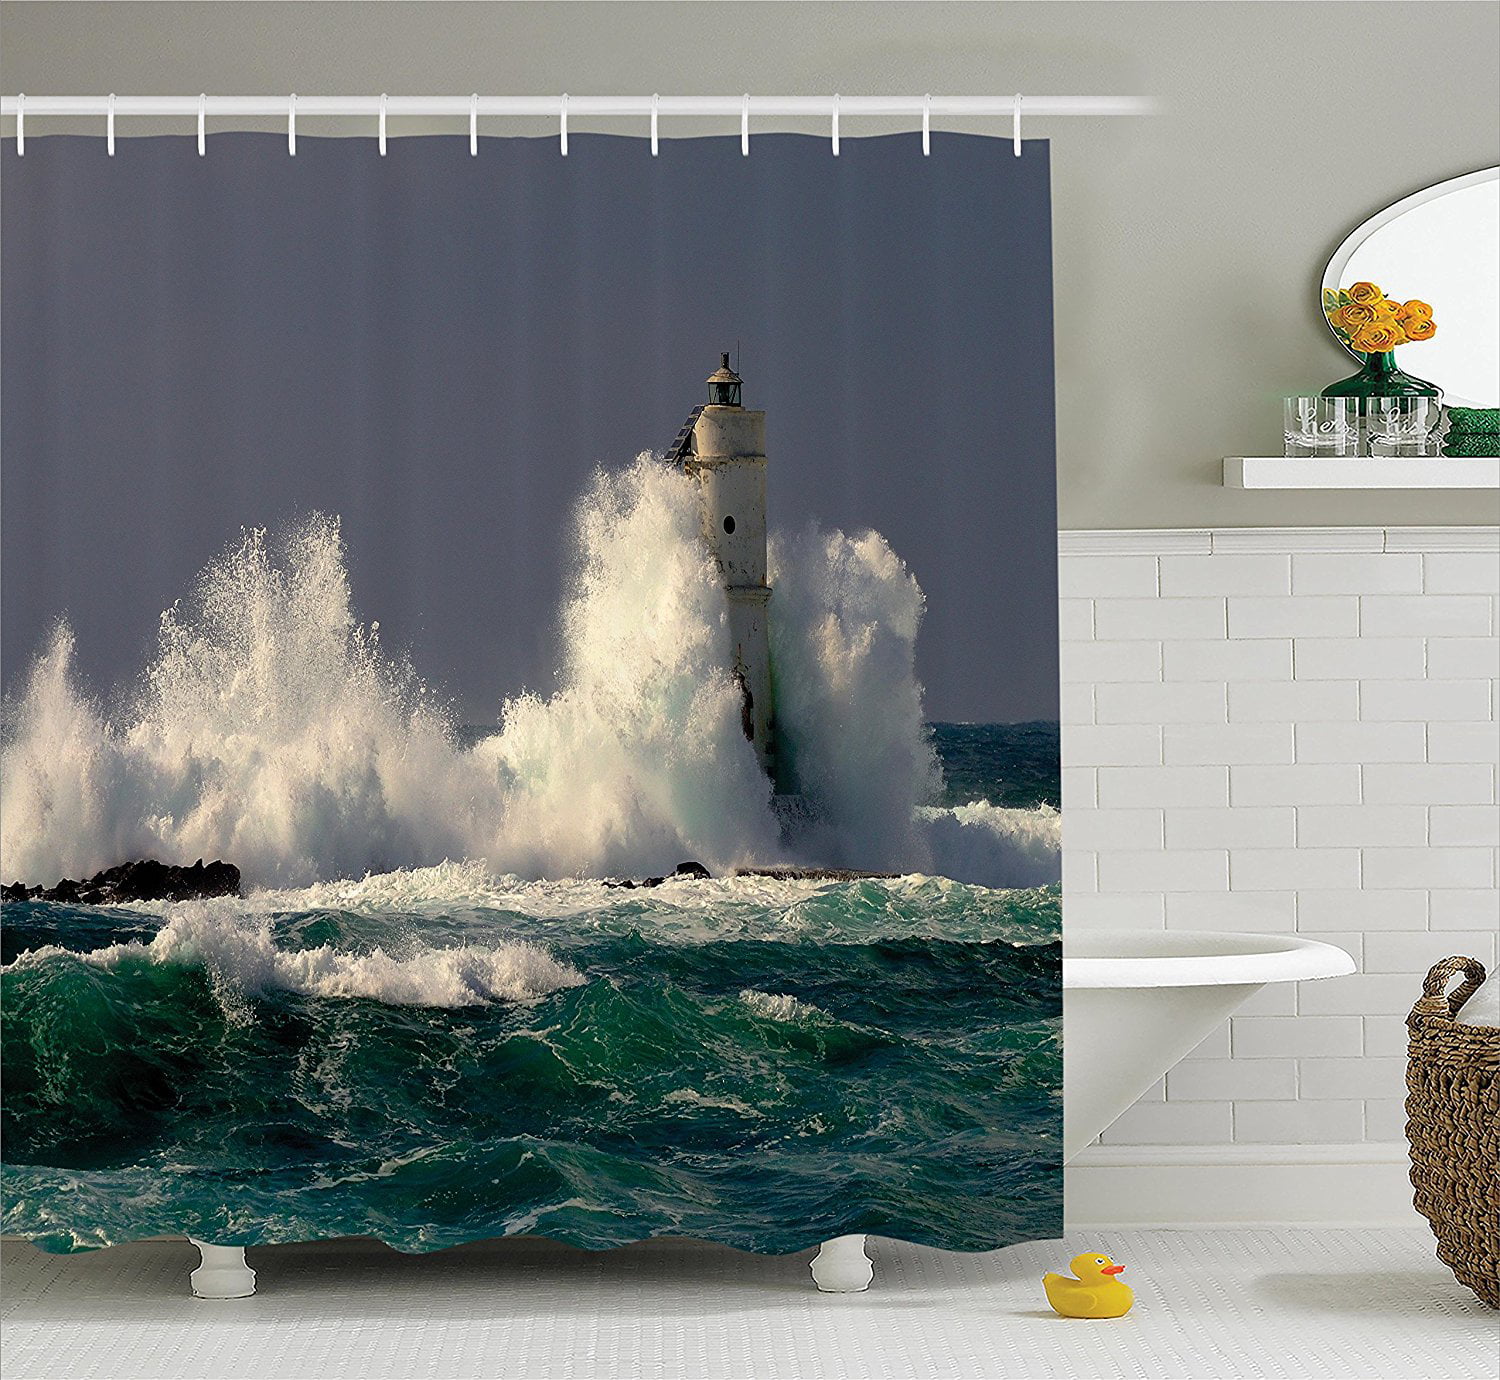 Details about   Painting Man With Boat Pattern Print Bathroom Decorative Shower Bath Curtains 